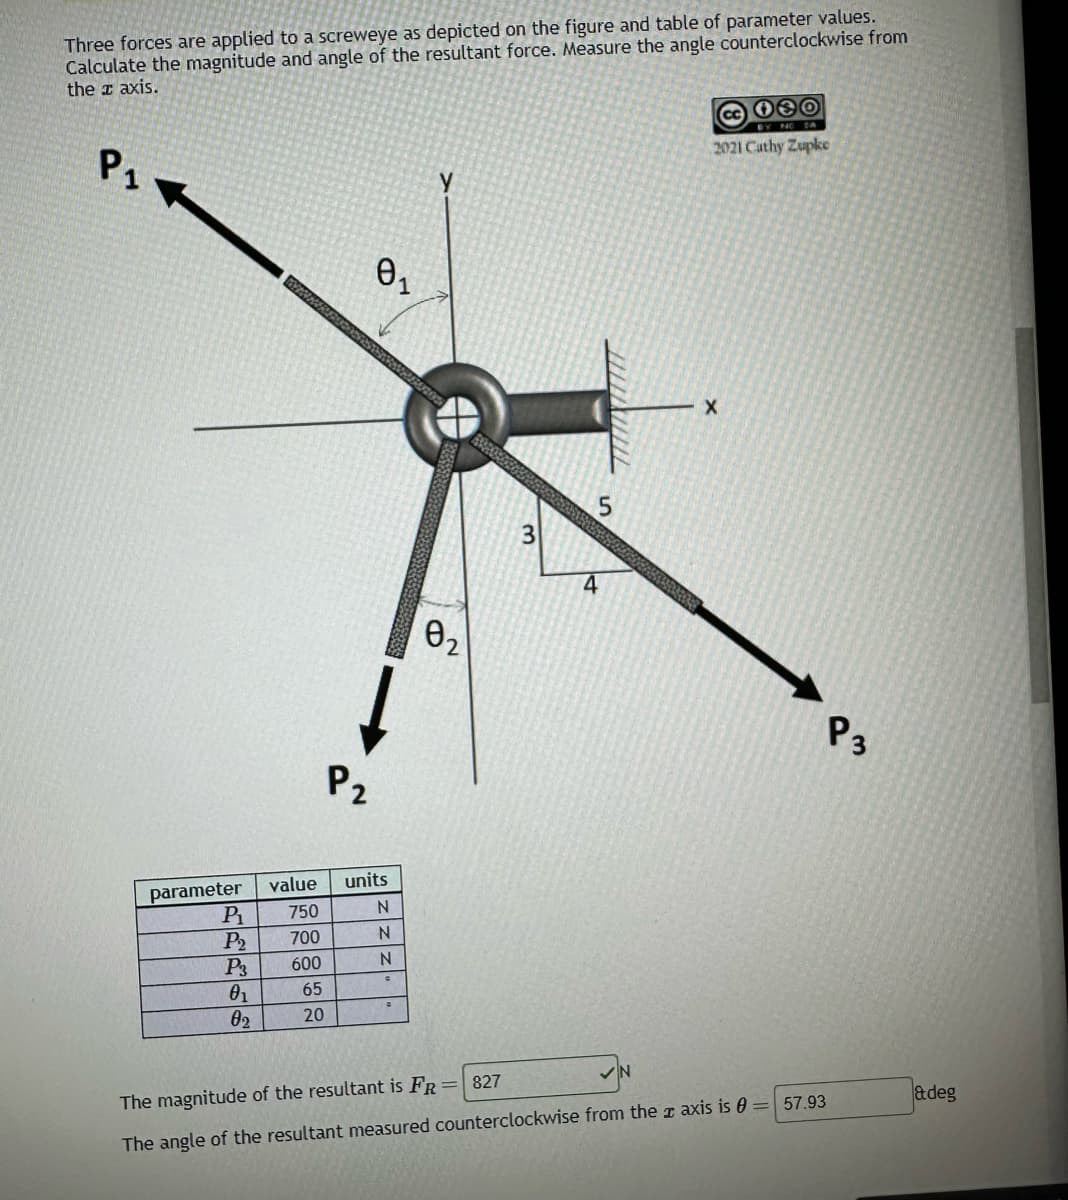 Three forces are applied to a screweye as depicted on the figure and table of parameter values.
Calculate the magnitude and angle of the resultant force. Measure the angle counterclockwise from
the z axis.
Р1
parameter
P₁ 750
P₂ 700
600
65
20
LEES
P3
0₁
02
P₂
0₁
value units
N
N
zz
N
G
C
y
0₂
3
TXILL
5
4
cc 080
2021 Cathy Zupke
X
The magnitude of the resultant is FR = 827
The angle of the resultant measured counterclockwise from the axis is = 57.93
P3
adeg